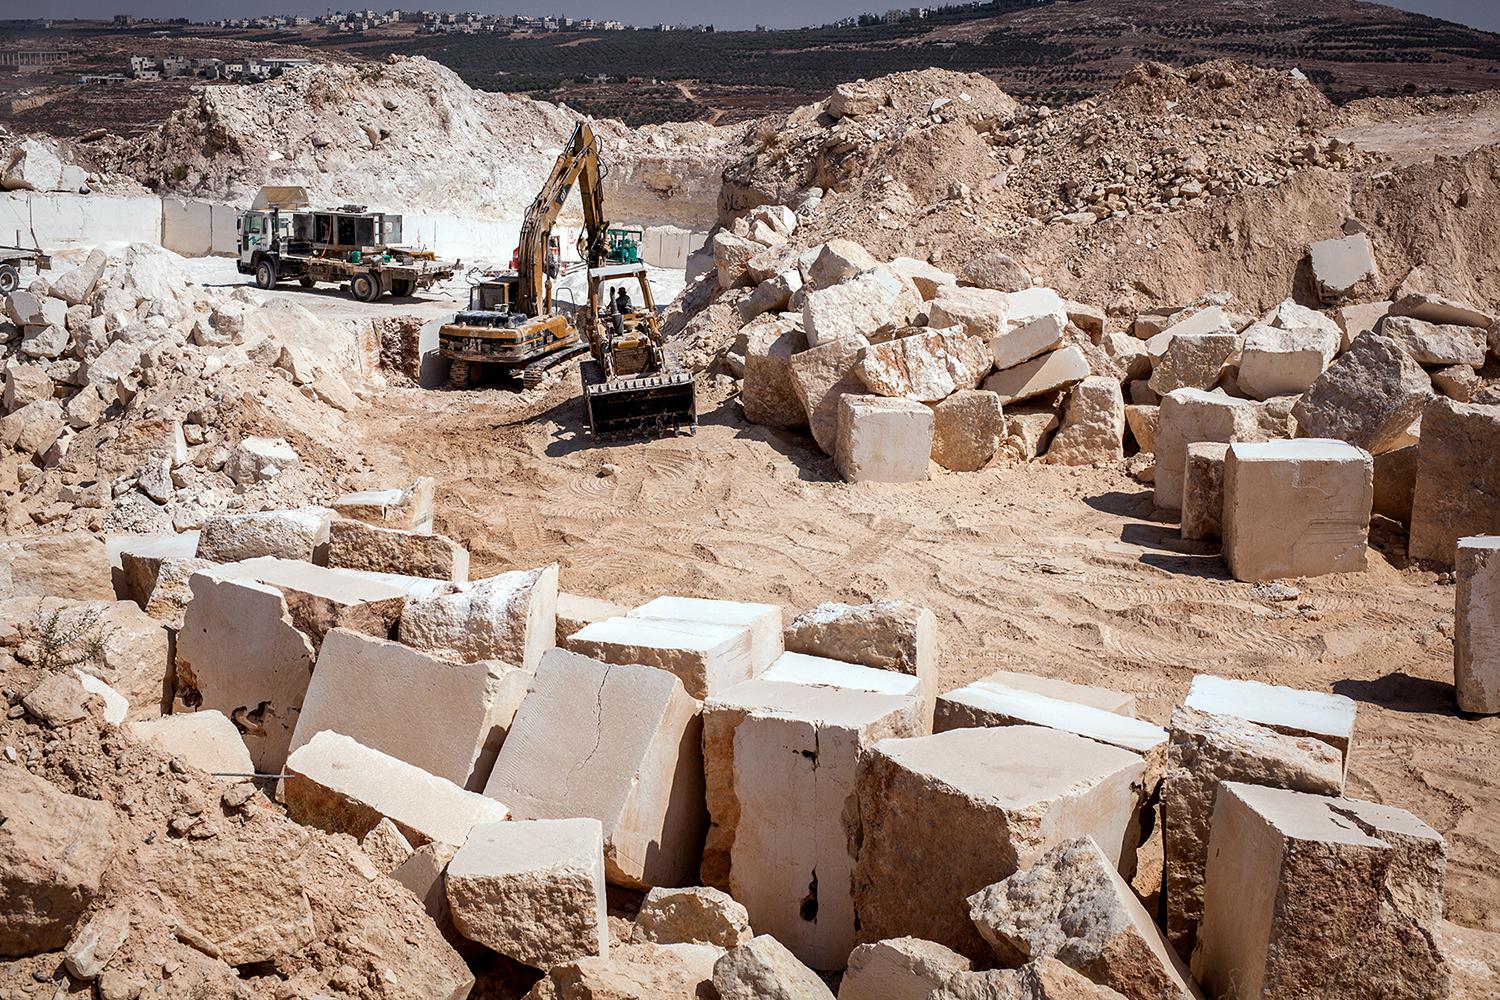 Palestinian-owned quarry operating without a license in Area C of the West Bank. Israel’s Civil Administration has not issued a single license to a Palestinian for a new quarry in Area C since 1994, according to the Palestinian Union of Stone and Marble. 